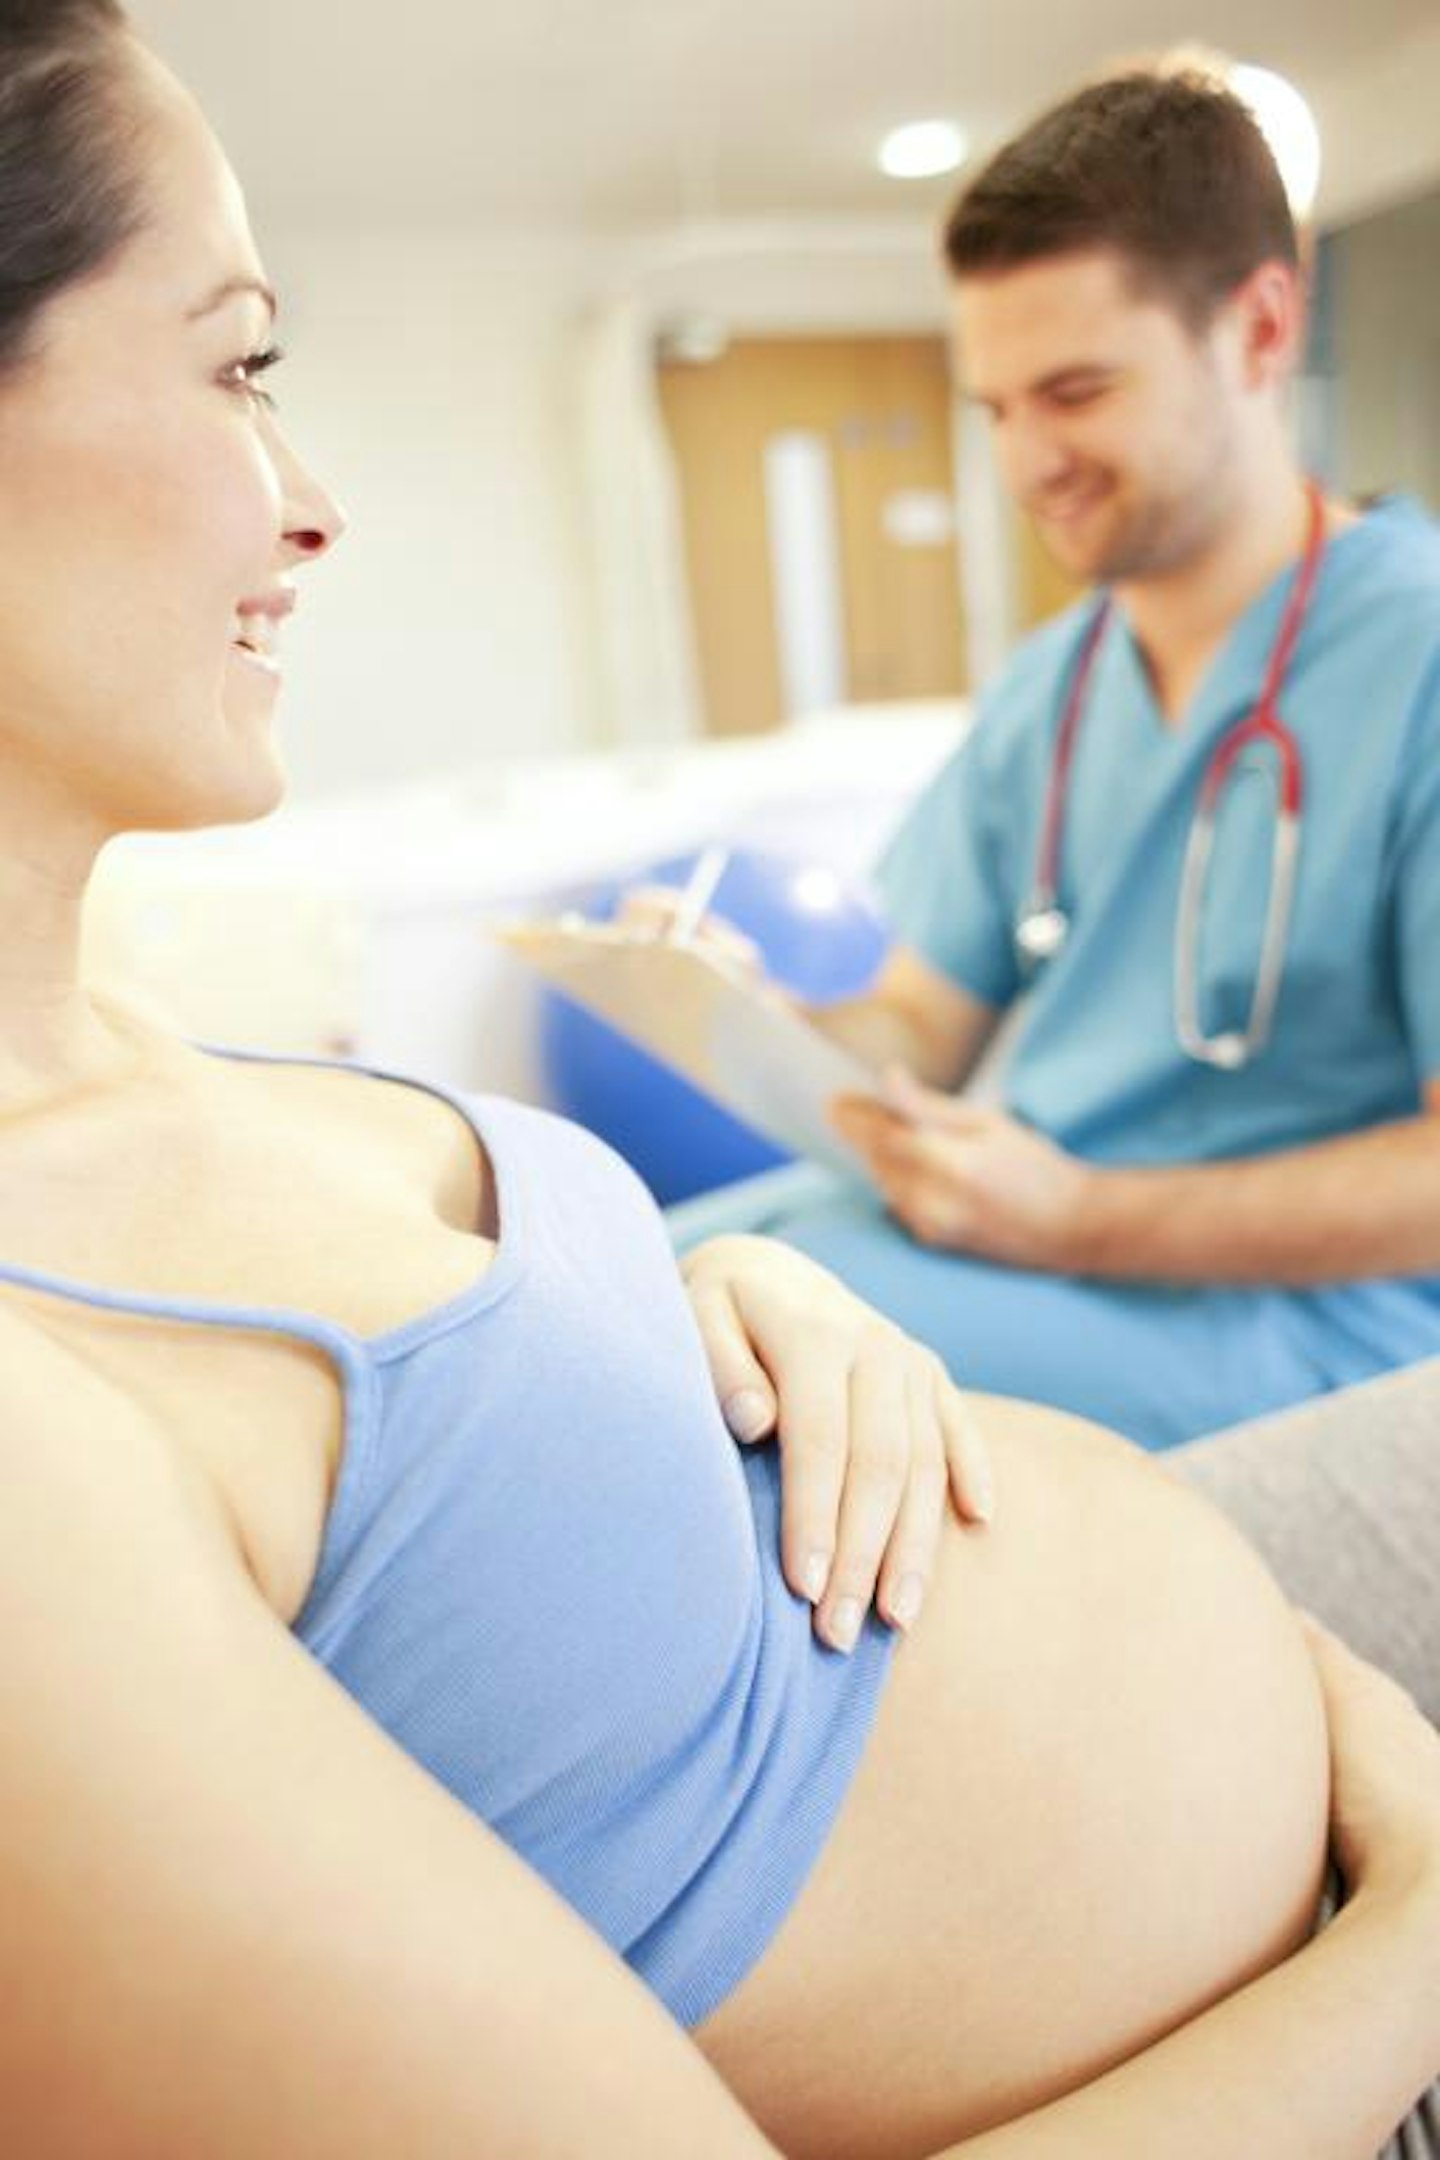 Pregnancy Booking-in Appointment? The Questions You Need To Ask…